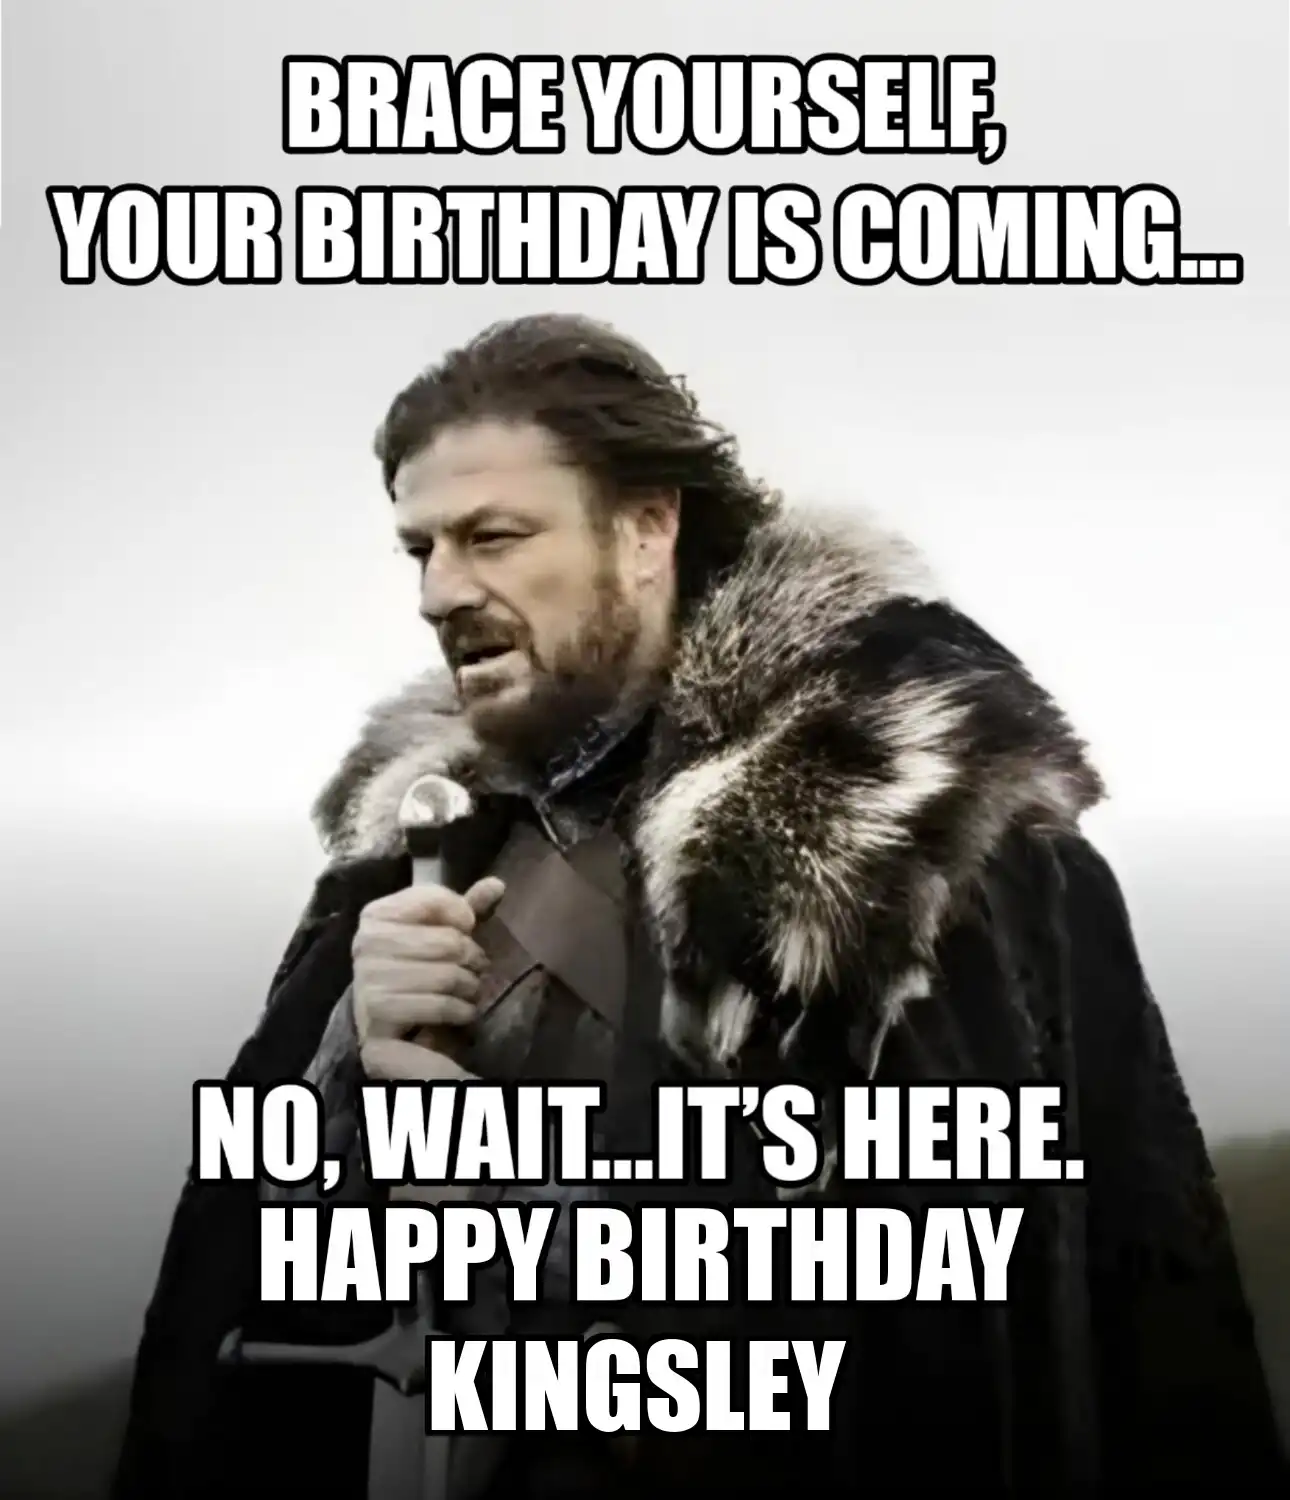 Happy Birthday Kingsley Brace Yourself Your Birthday Is Coming Meme